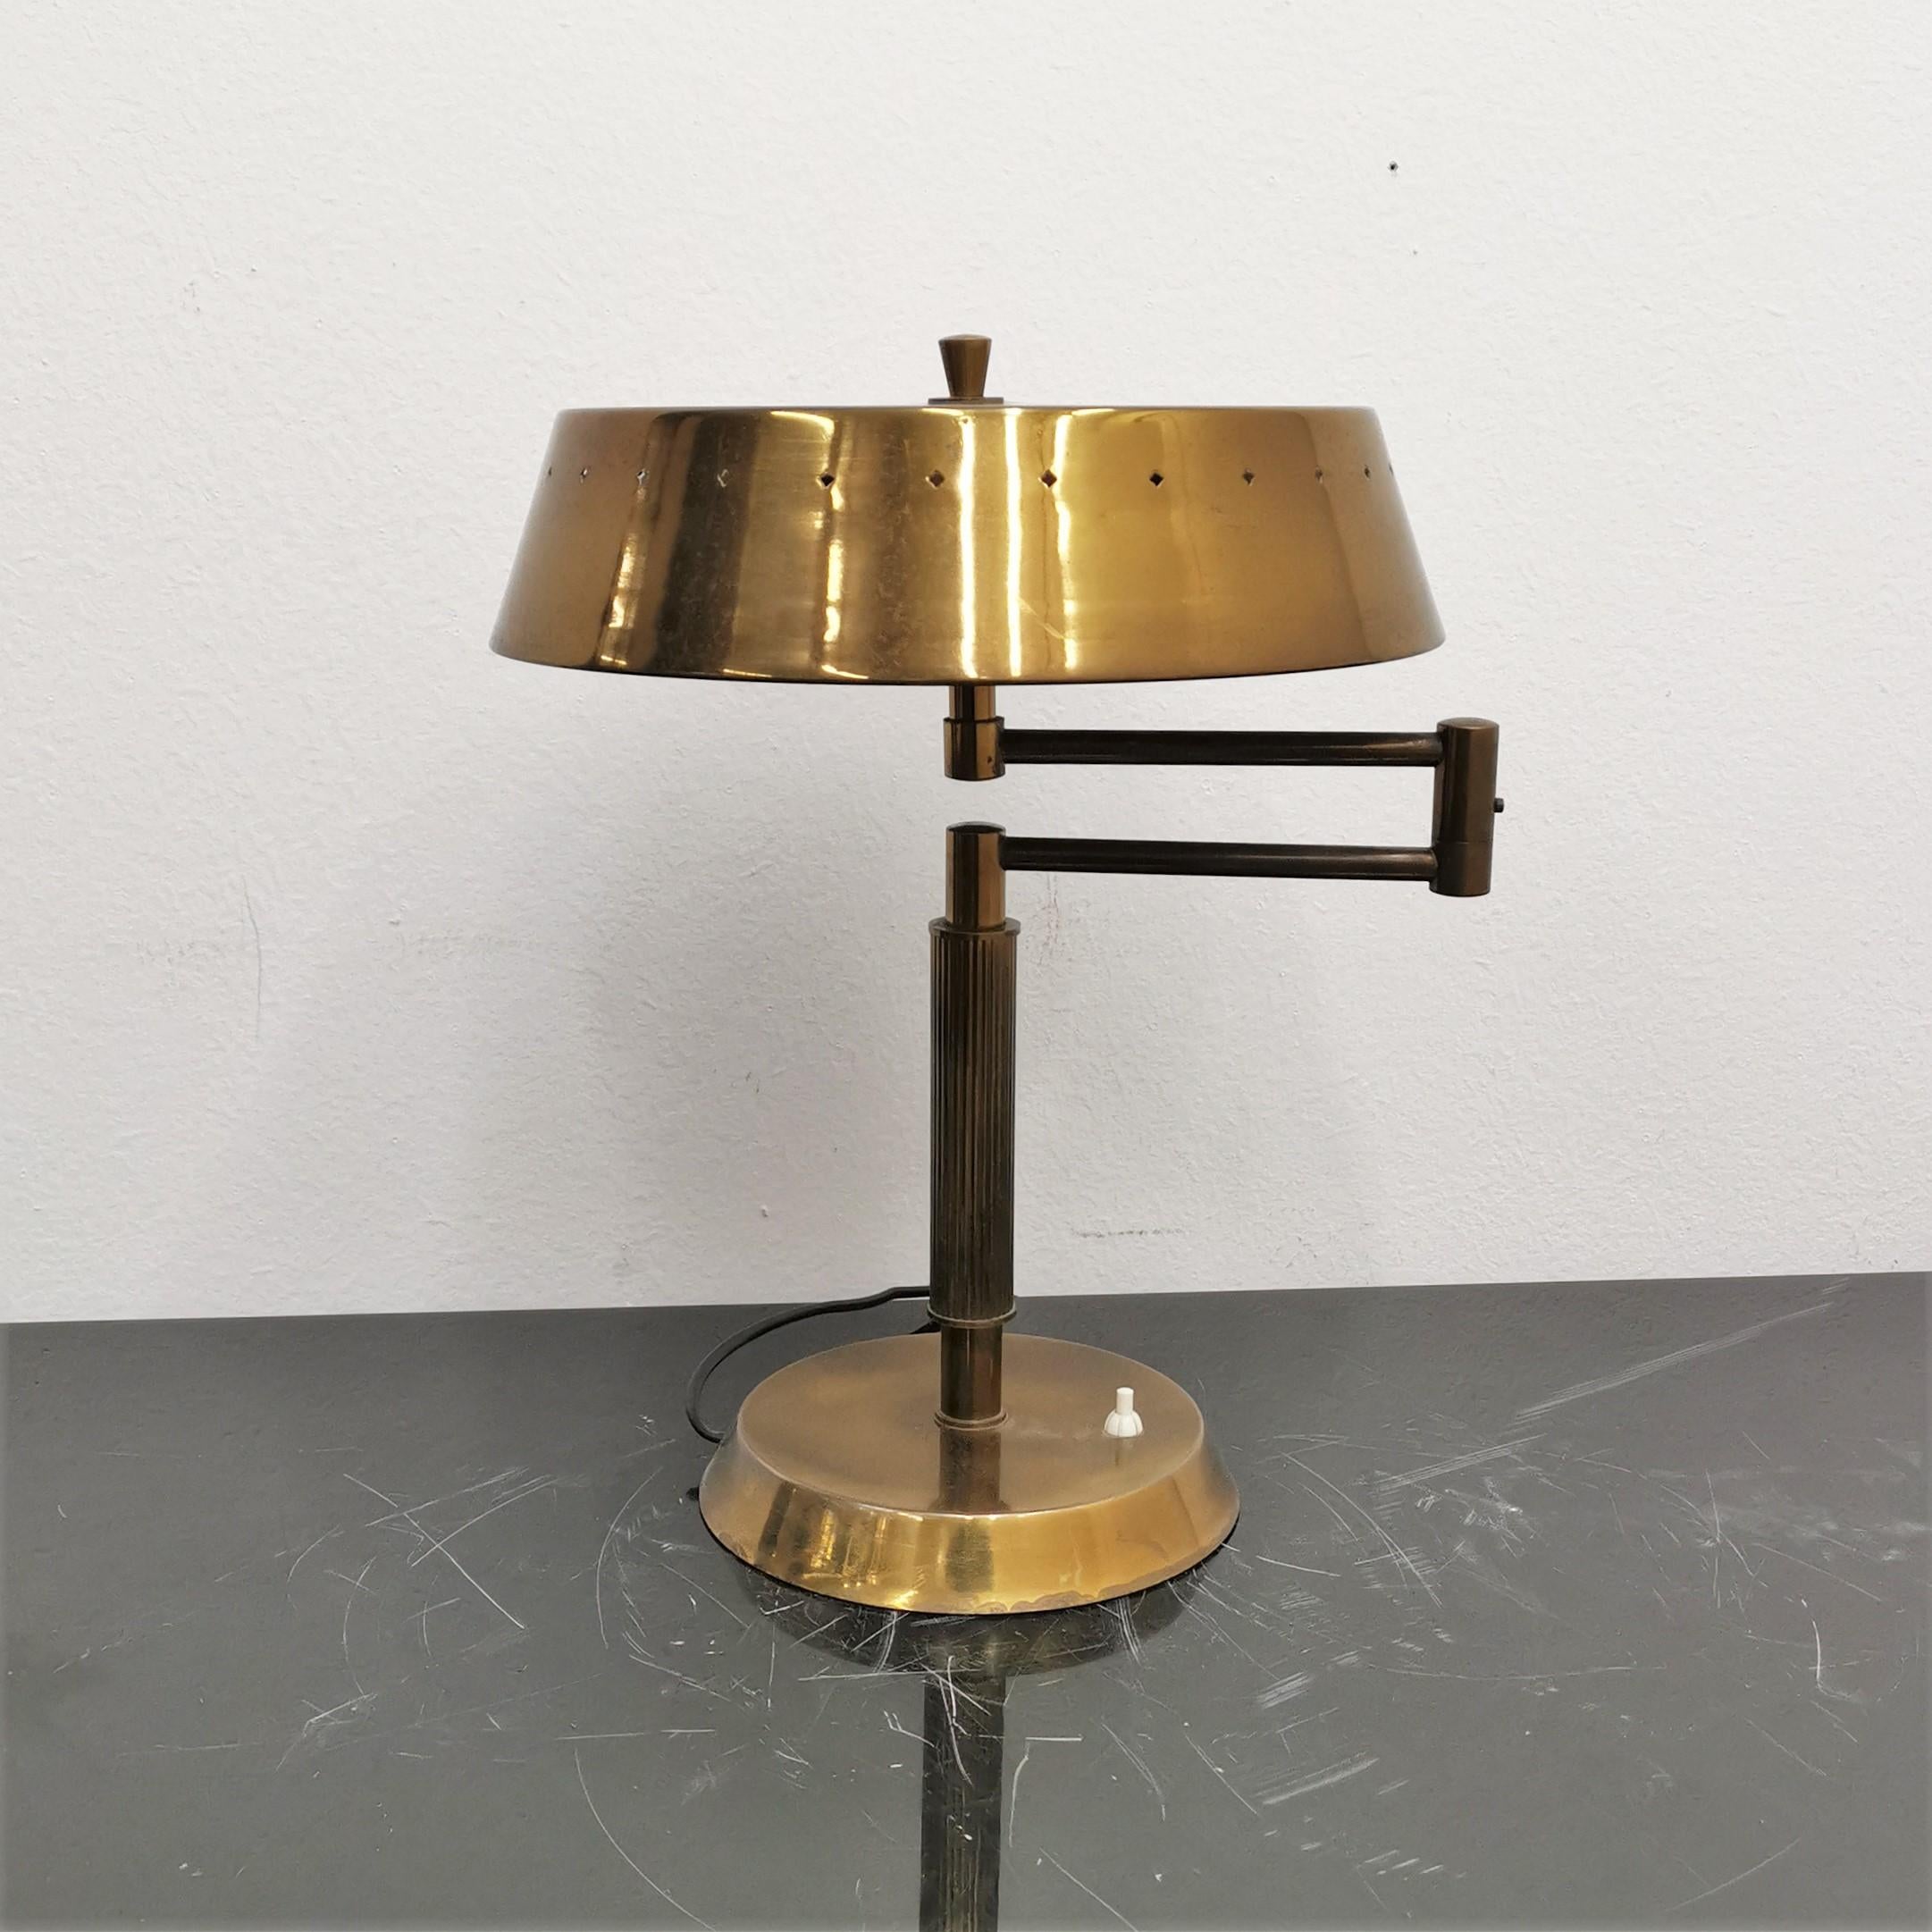 Stylish and beautiful brushed brass swing-arm desk lamp, adjustable via two joints and circular brass lampshade. Attributed to Oscar Torlasco in Italy in the 1950s.
Wear consistent with age and use.
 